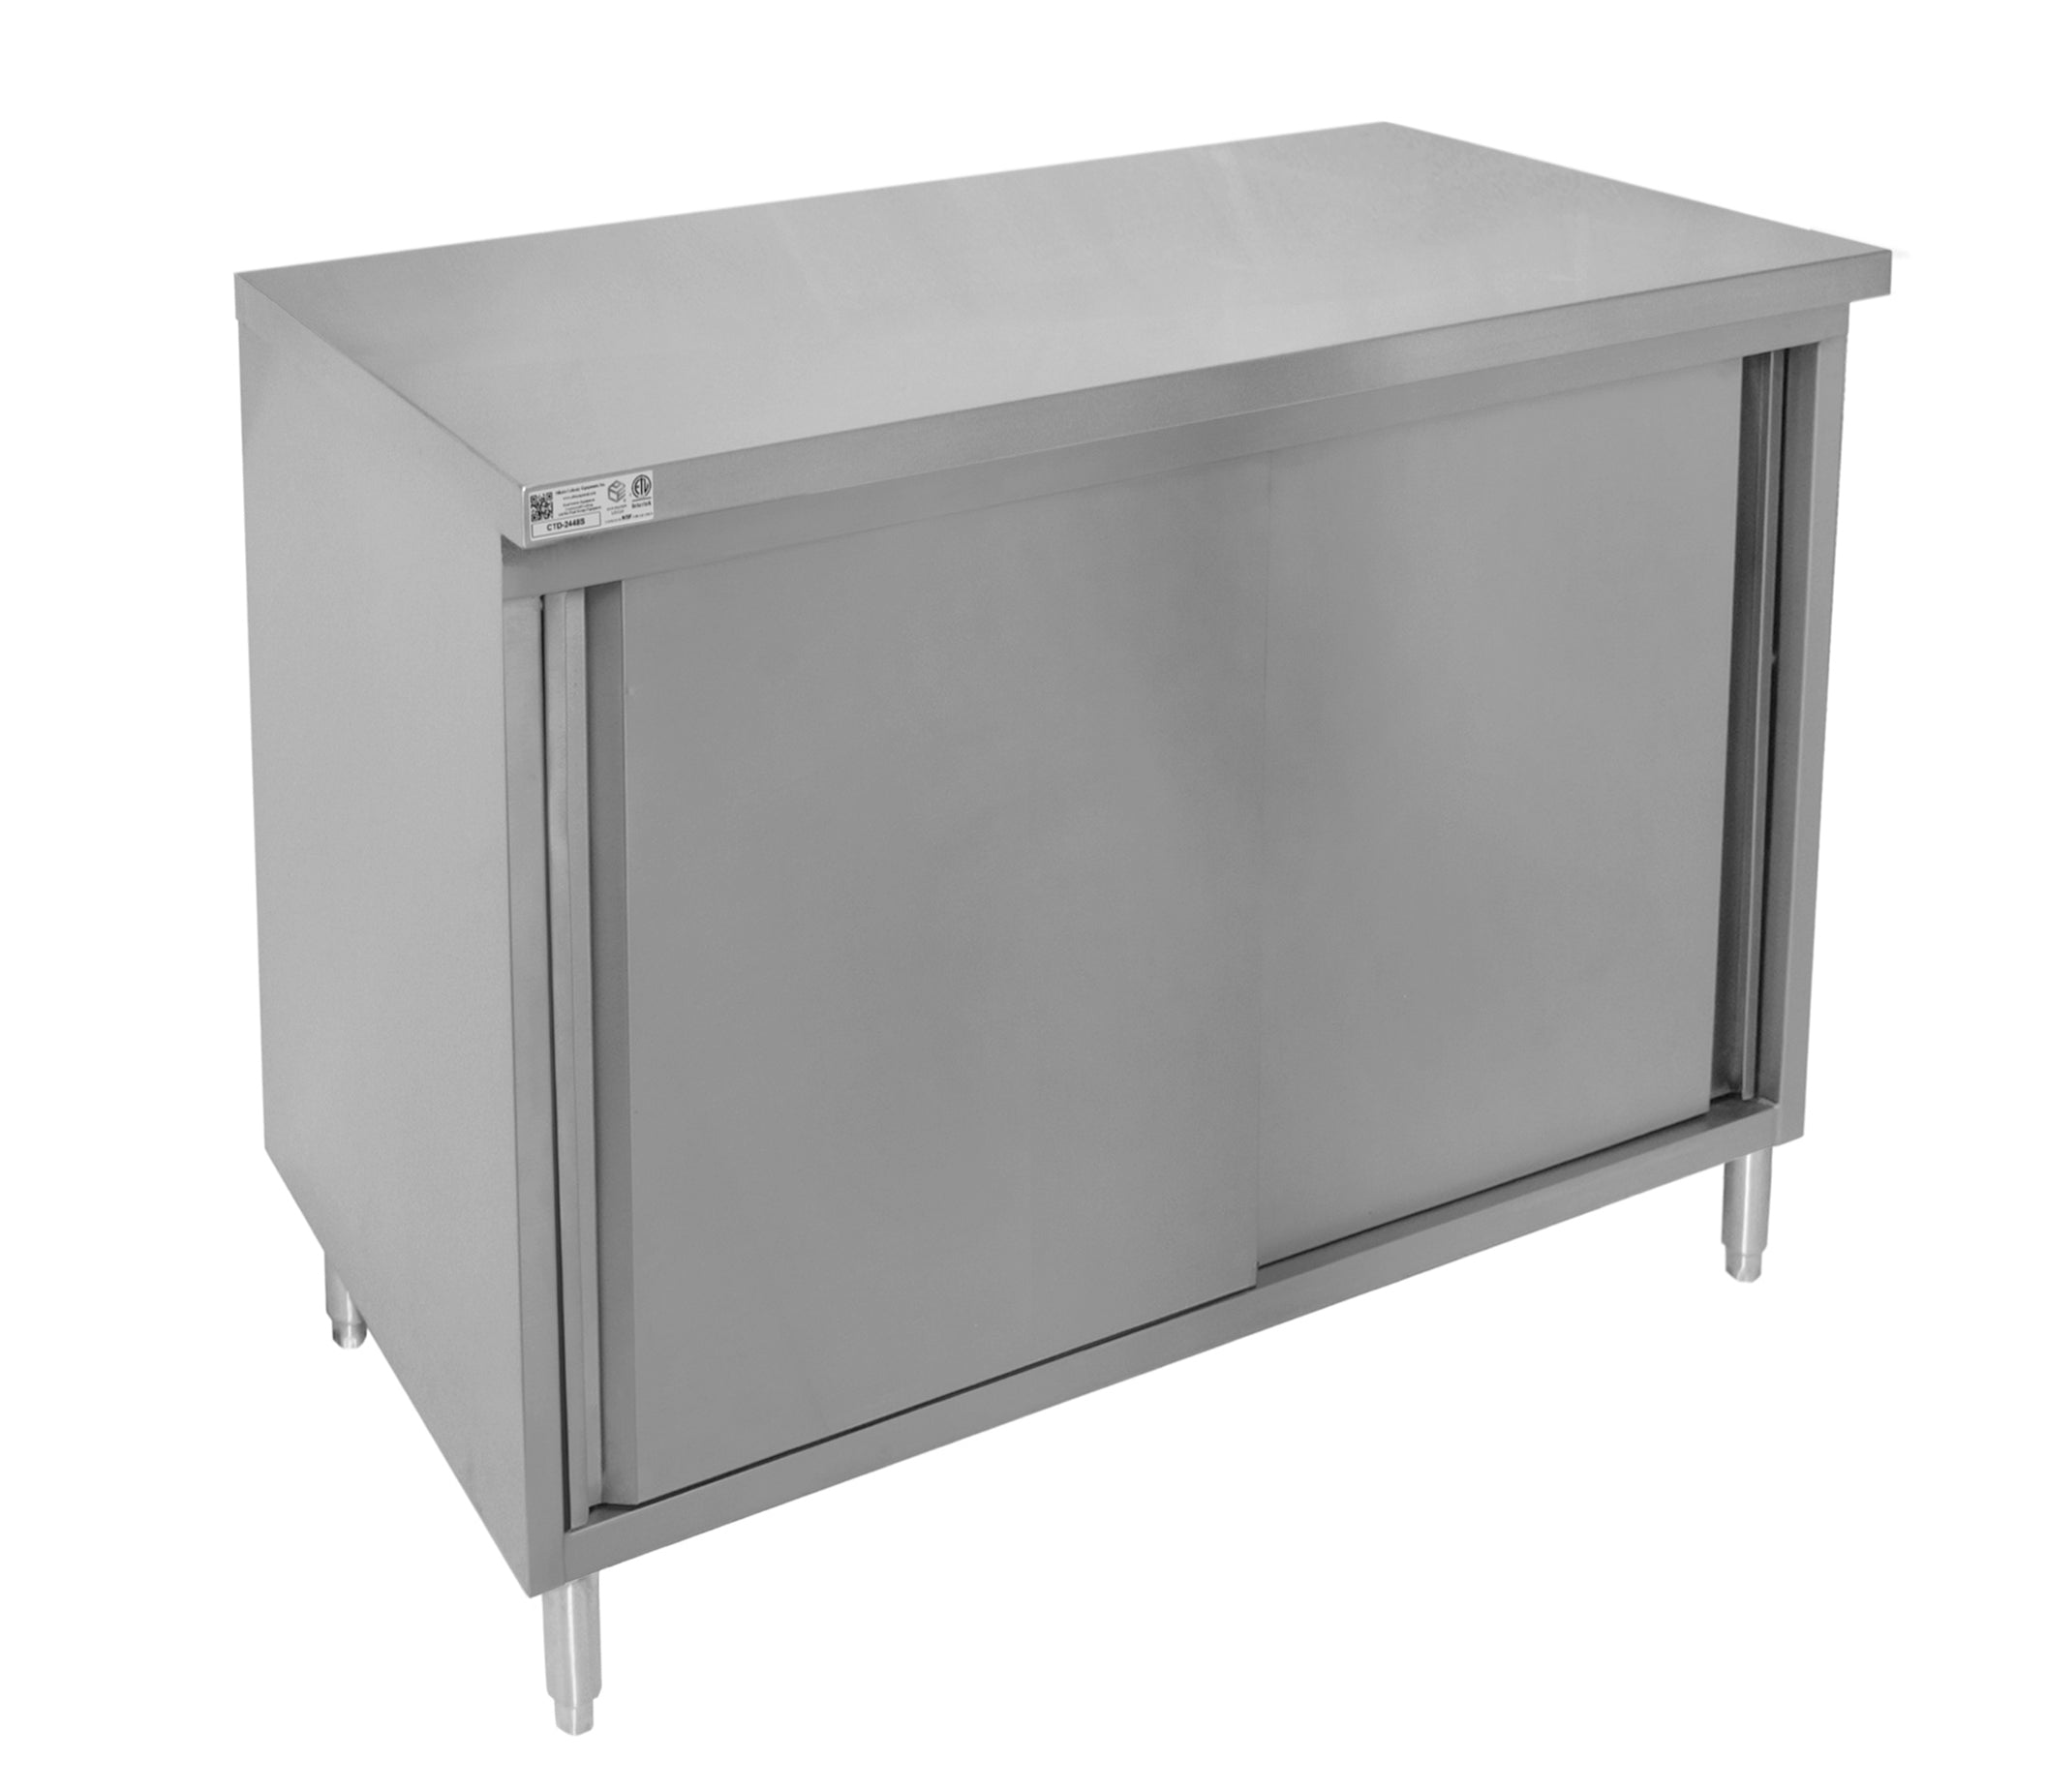 GSW 18 Gauge Flat Top All Stainless Steel Cabinet Enclosed Work Table w/Sliding Door 24"(W) x 60"(L) x 35"(H)